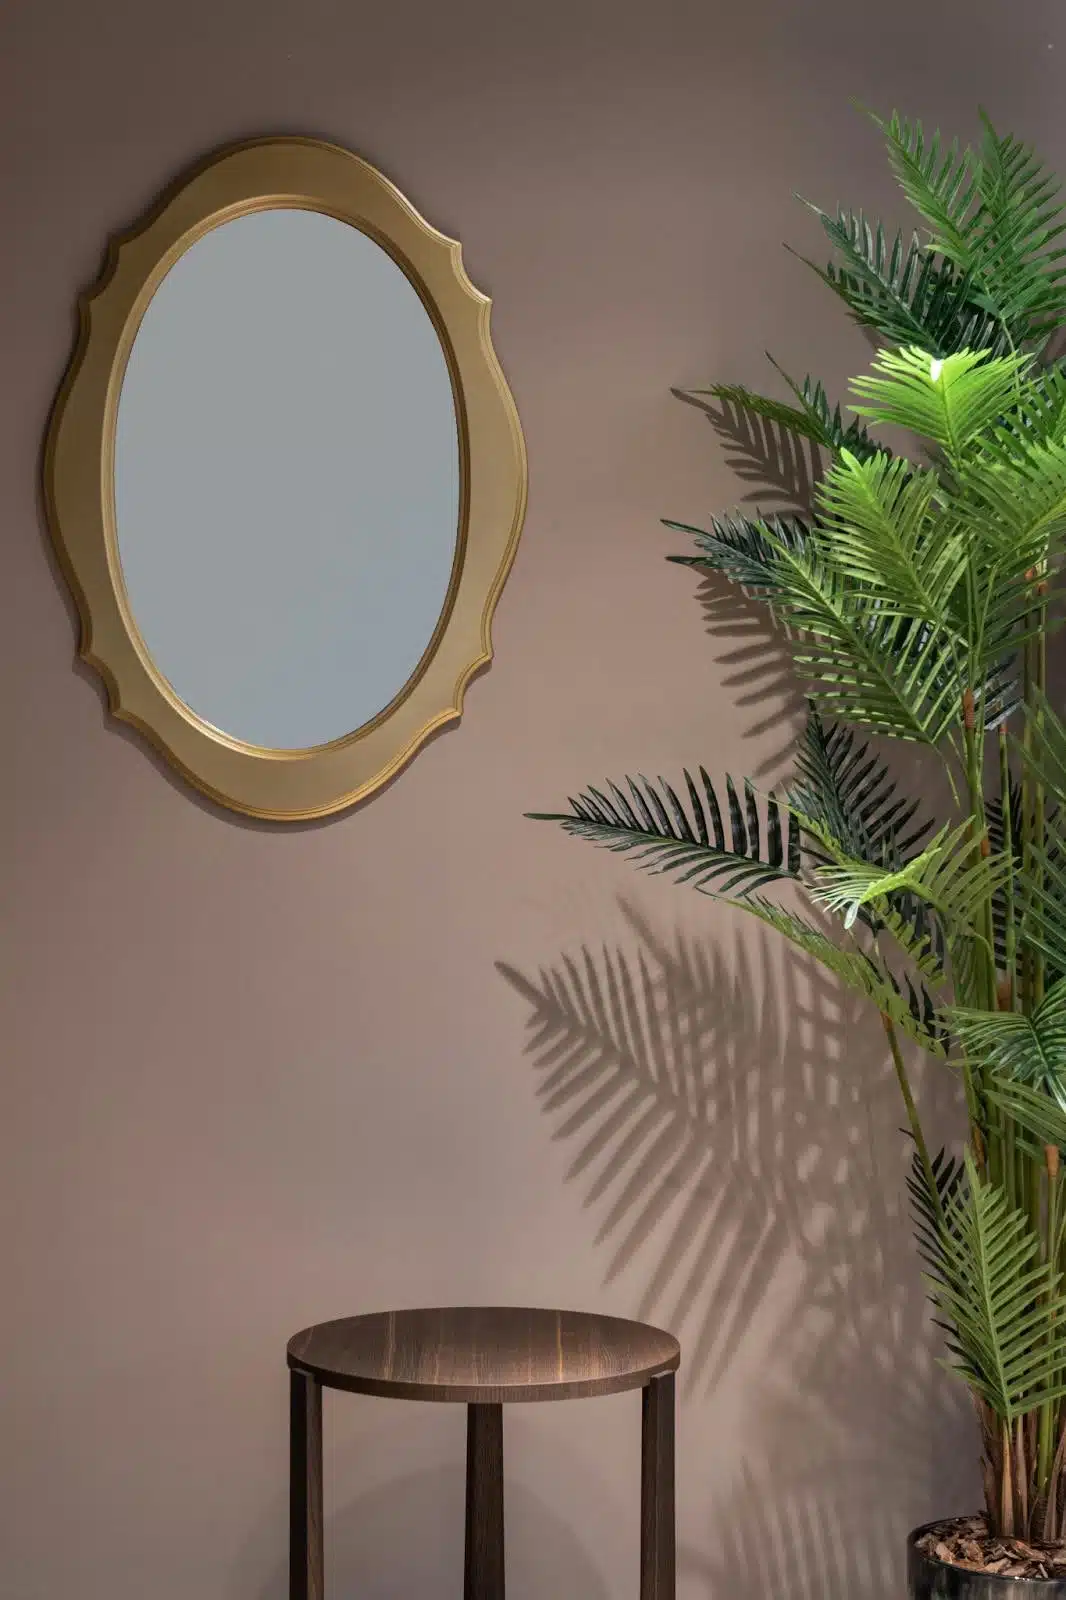 Room with potted plant near mirror and table